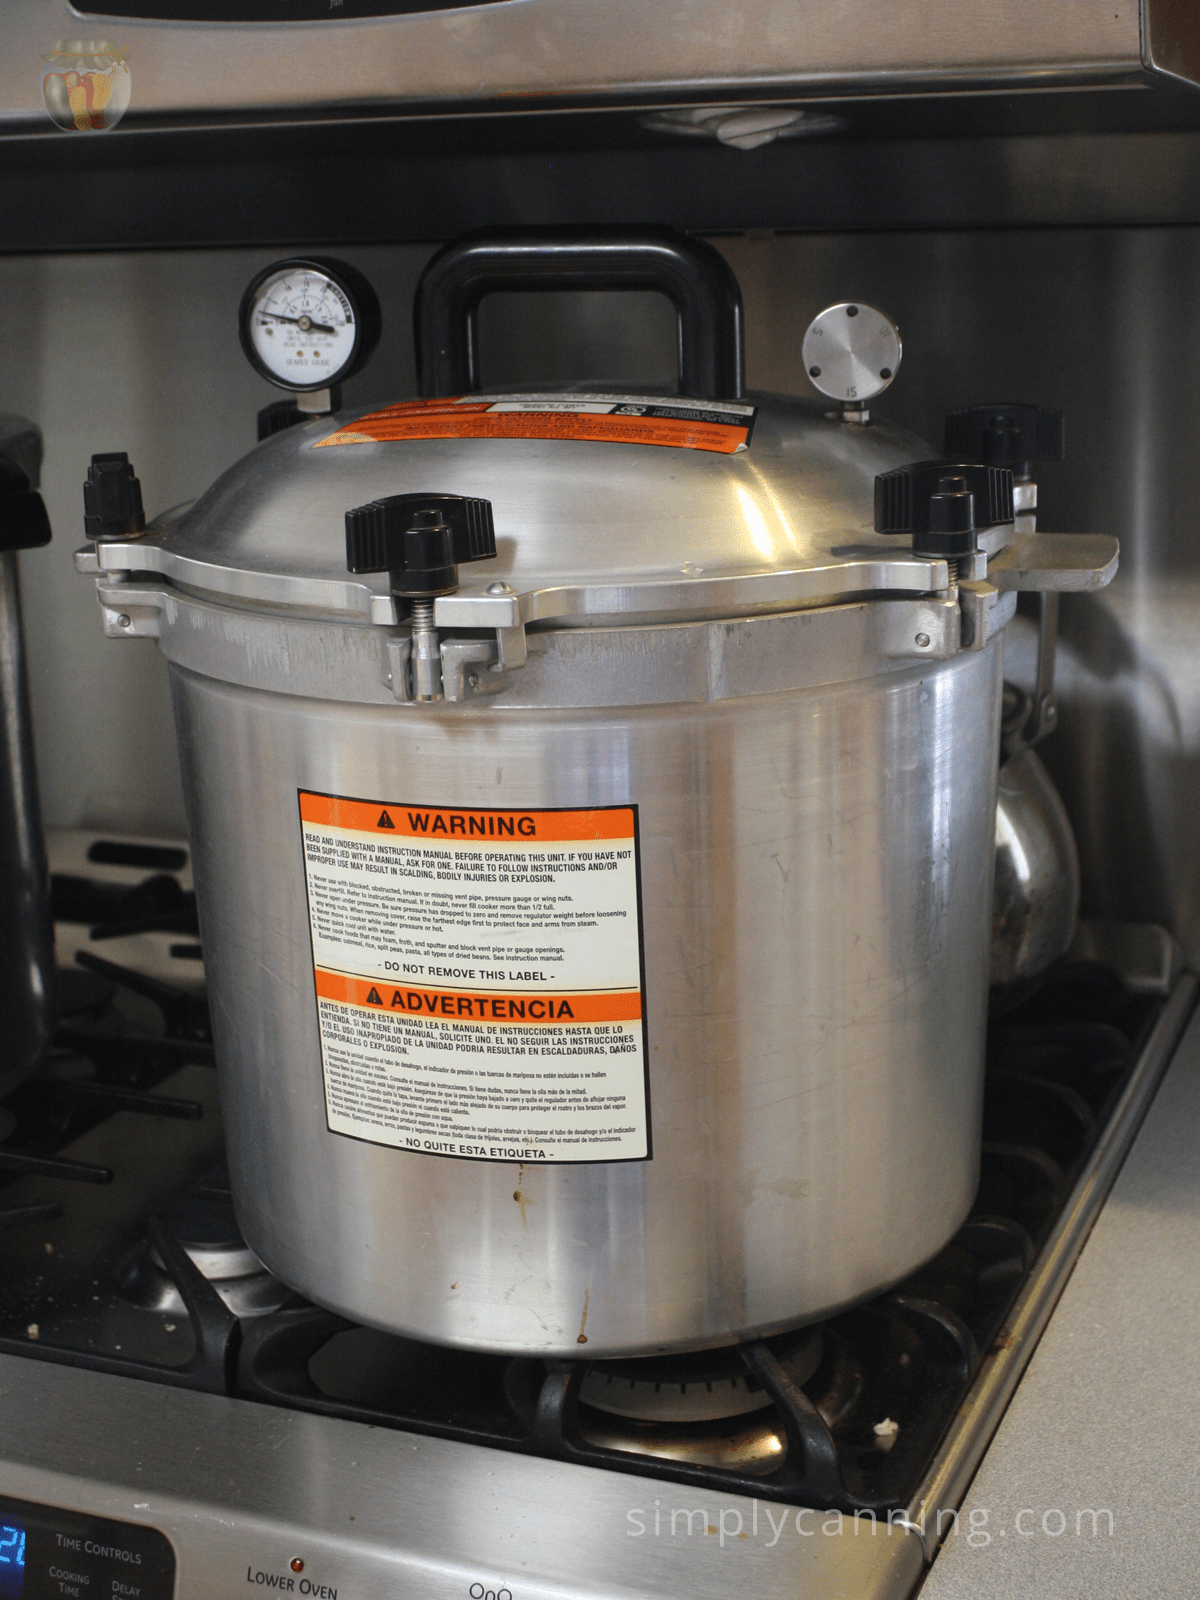 The large All American canner sitting on Sharon's stovetop.